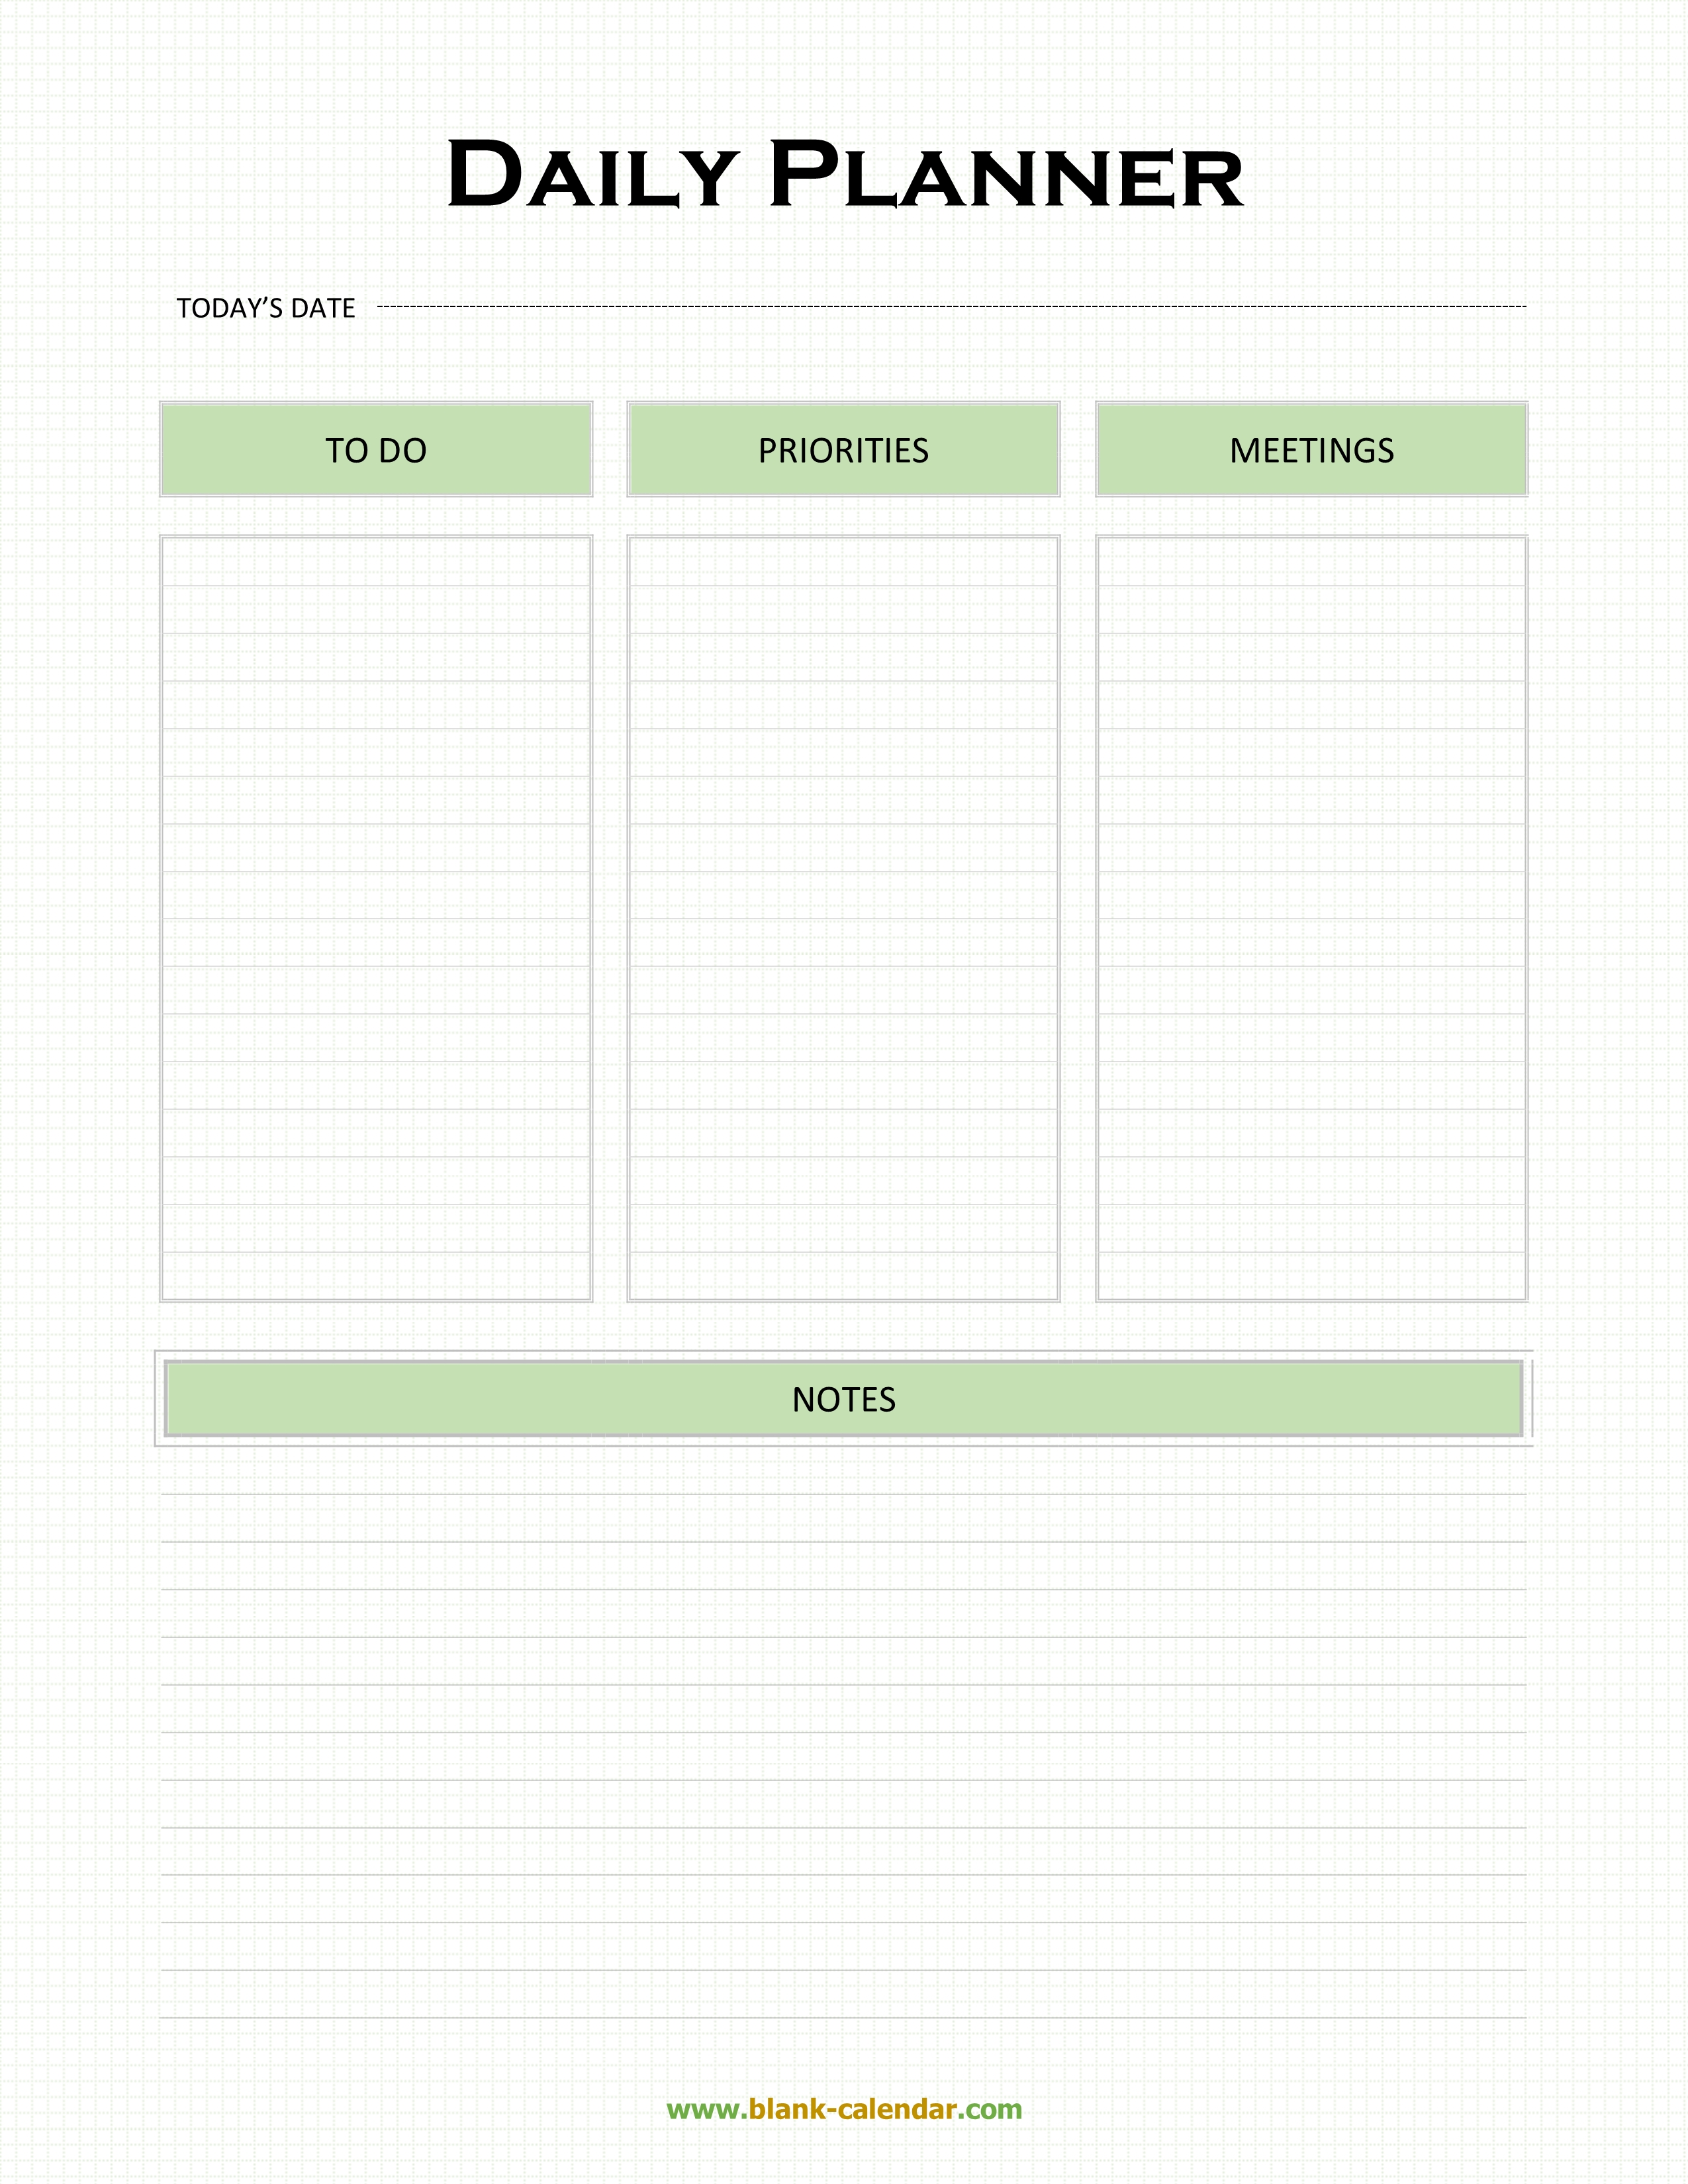 Daily Planner Templates (WORD, EXCEL, PDF) Inside Printable Blank Daily Schedule Template